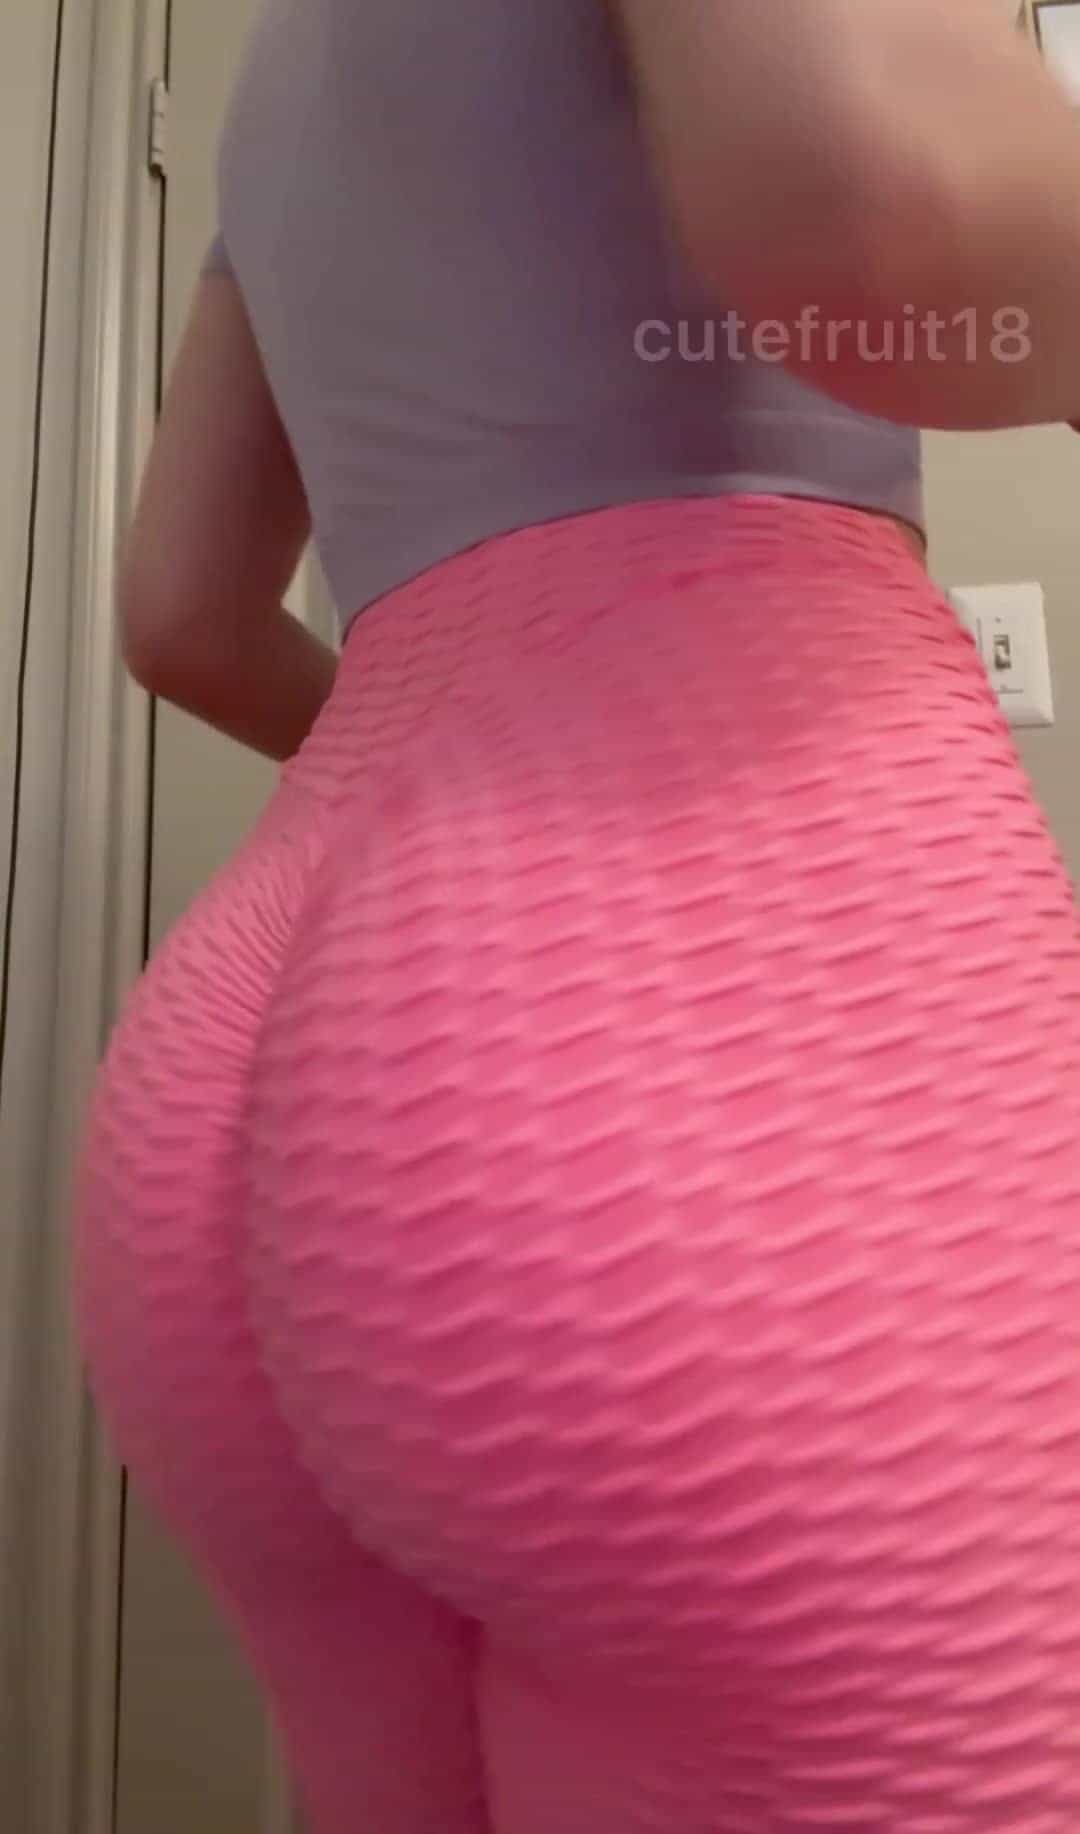 i think my booty looks best in bright colored leggings